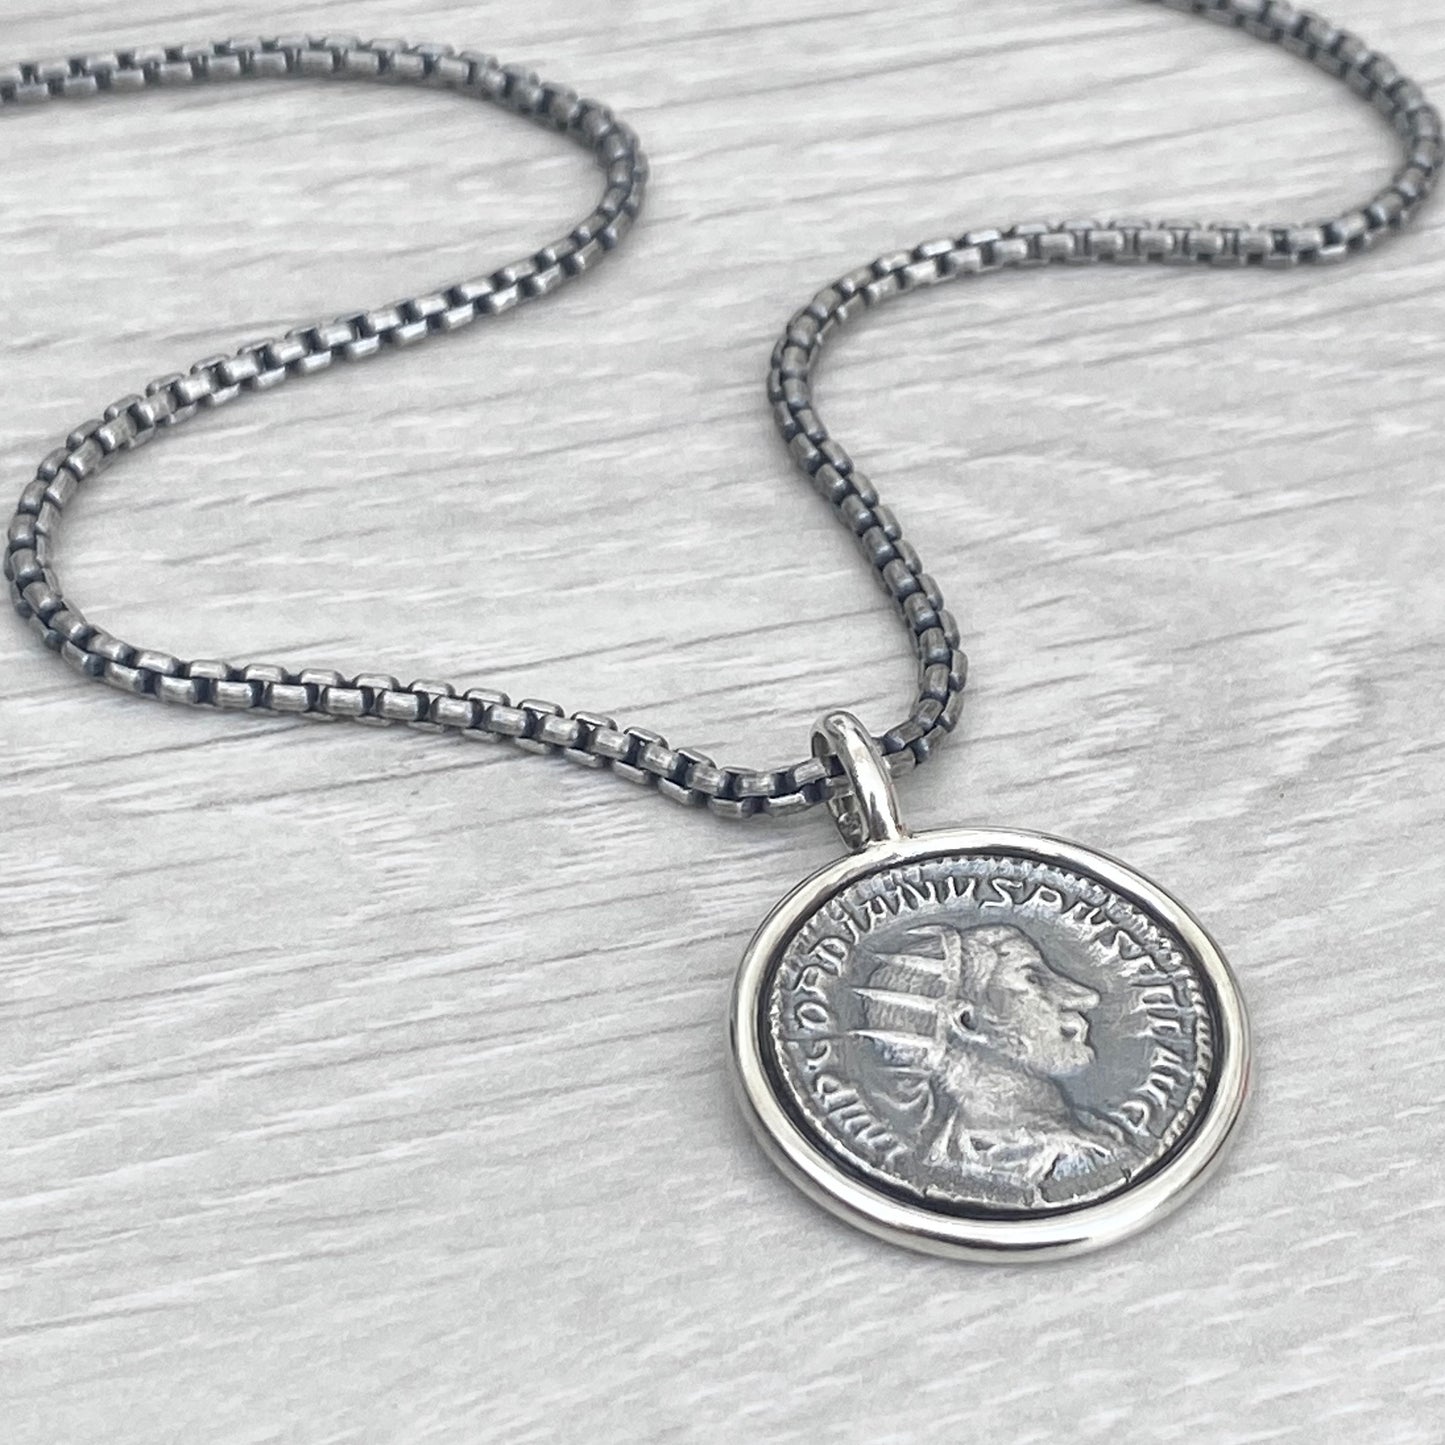 Handmade to order - Oxidised solid Sterling silver 23mm replica Roman coin circle framed pendant on a choice of trace or round box chain